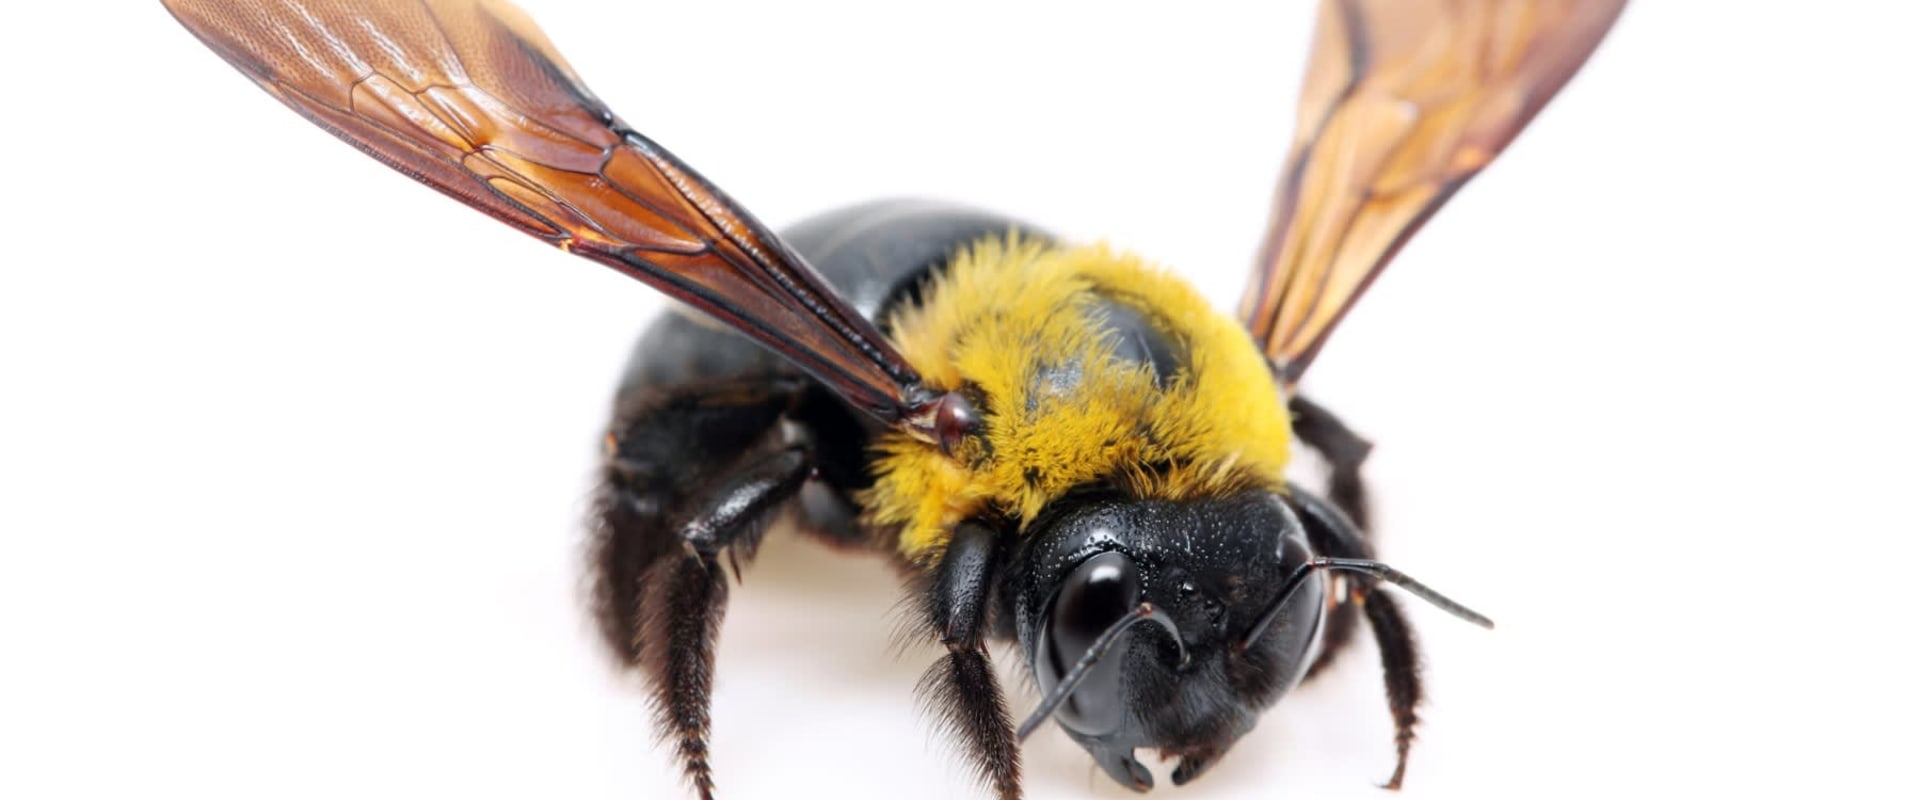 Carpenter Bees: Identification and Types